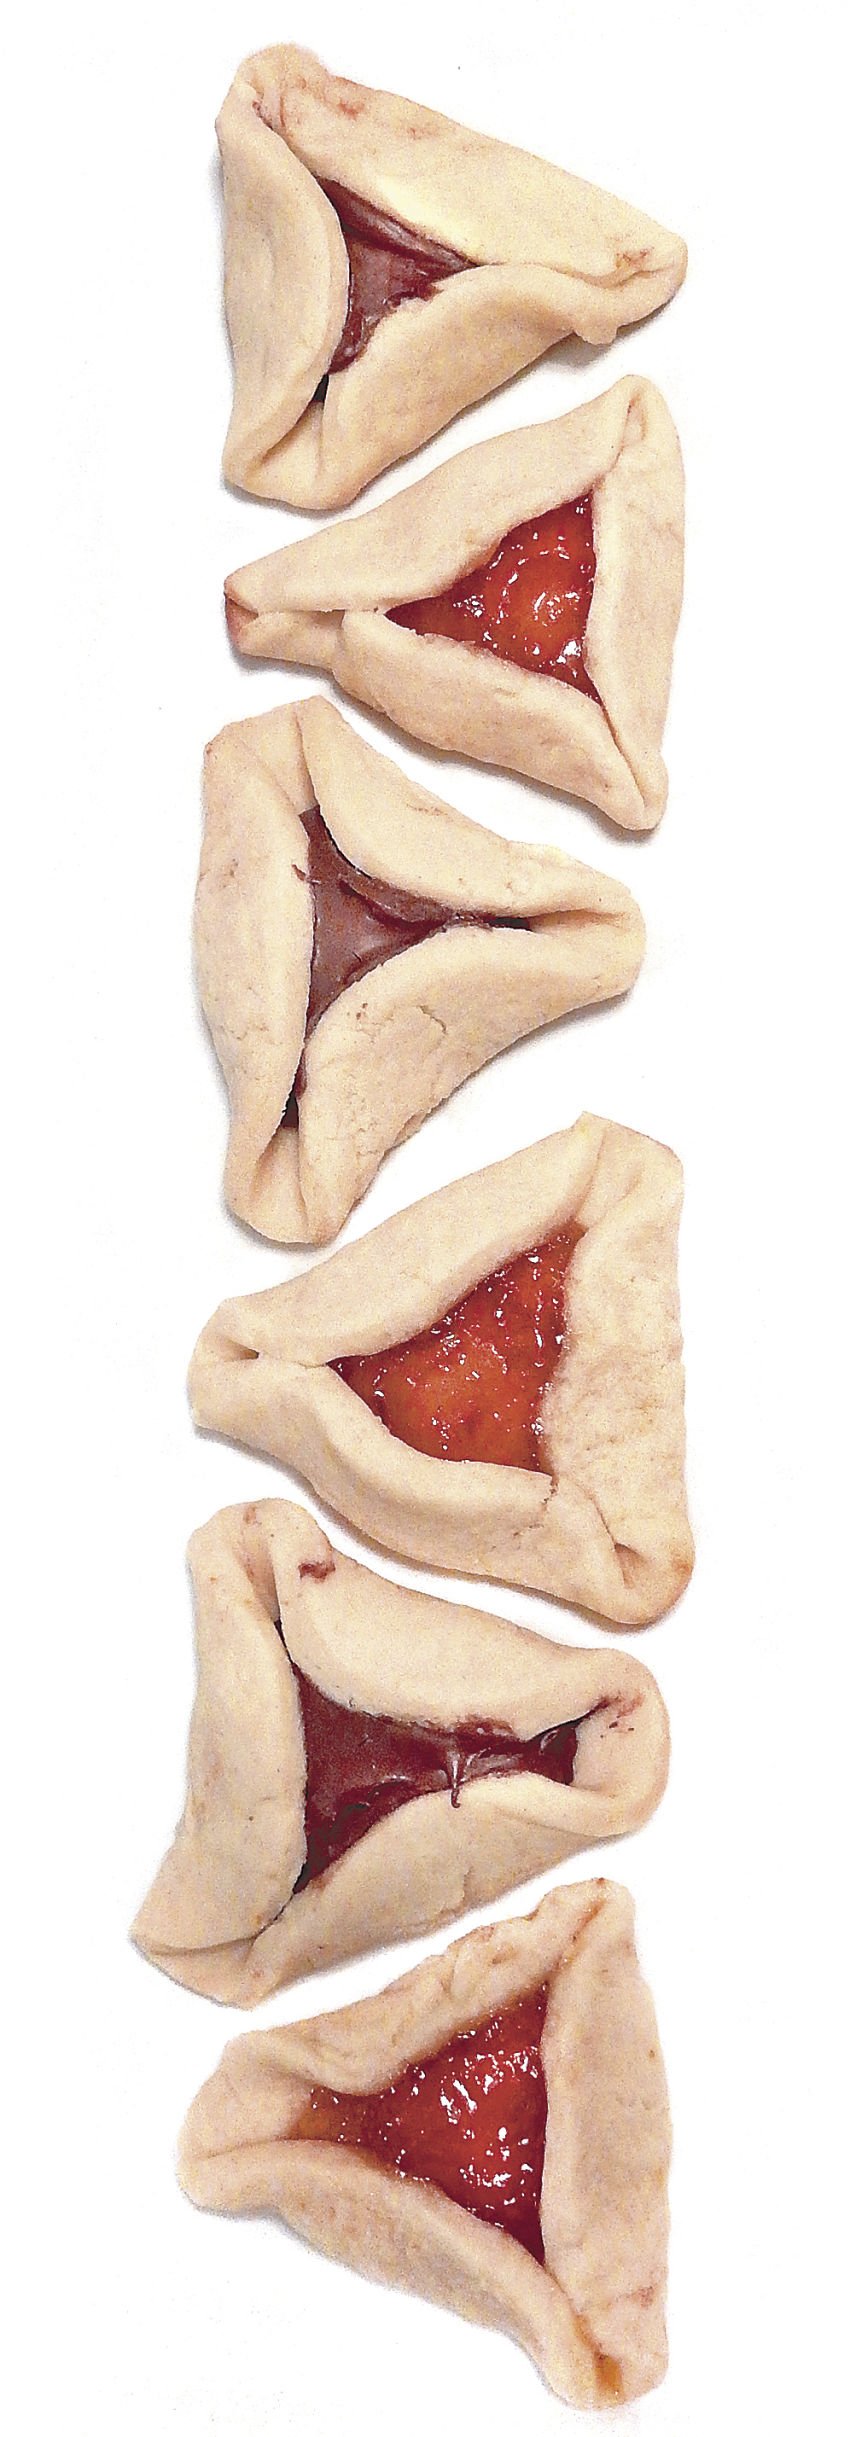 Hamentaschen cookie a tasty part of the Purim story